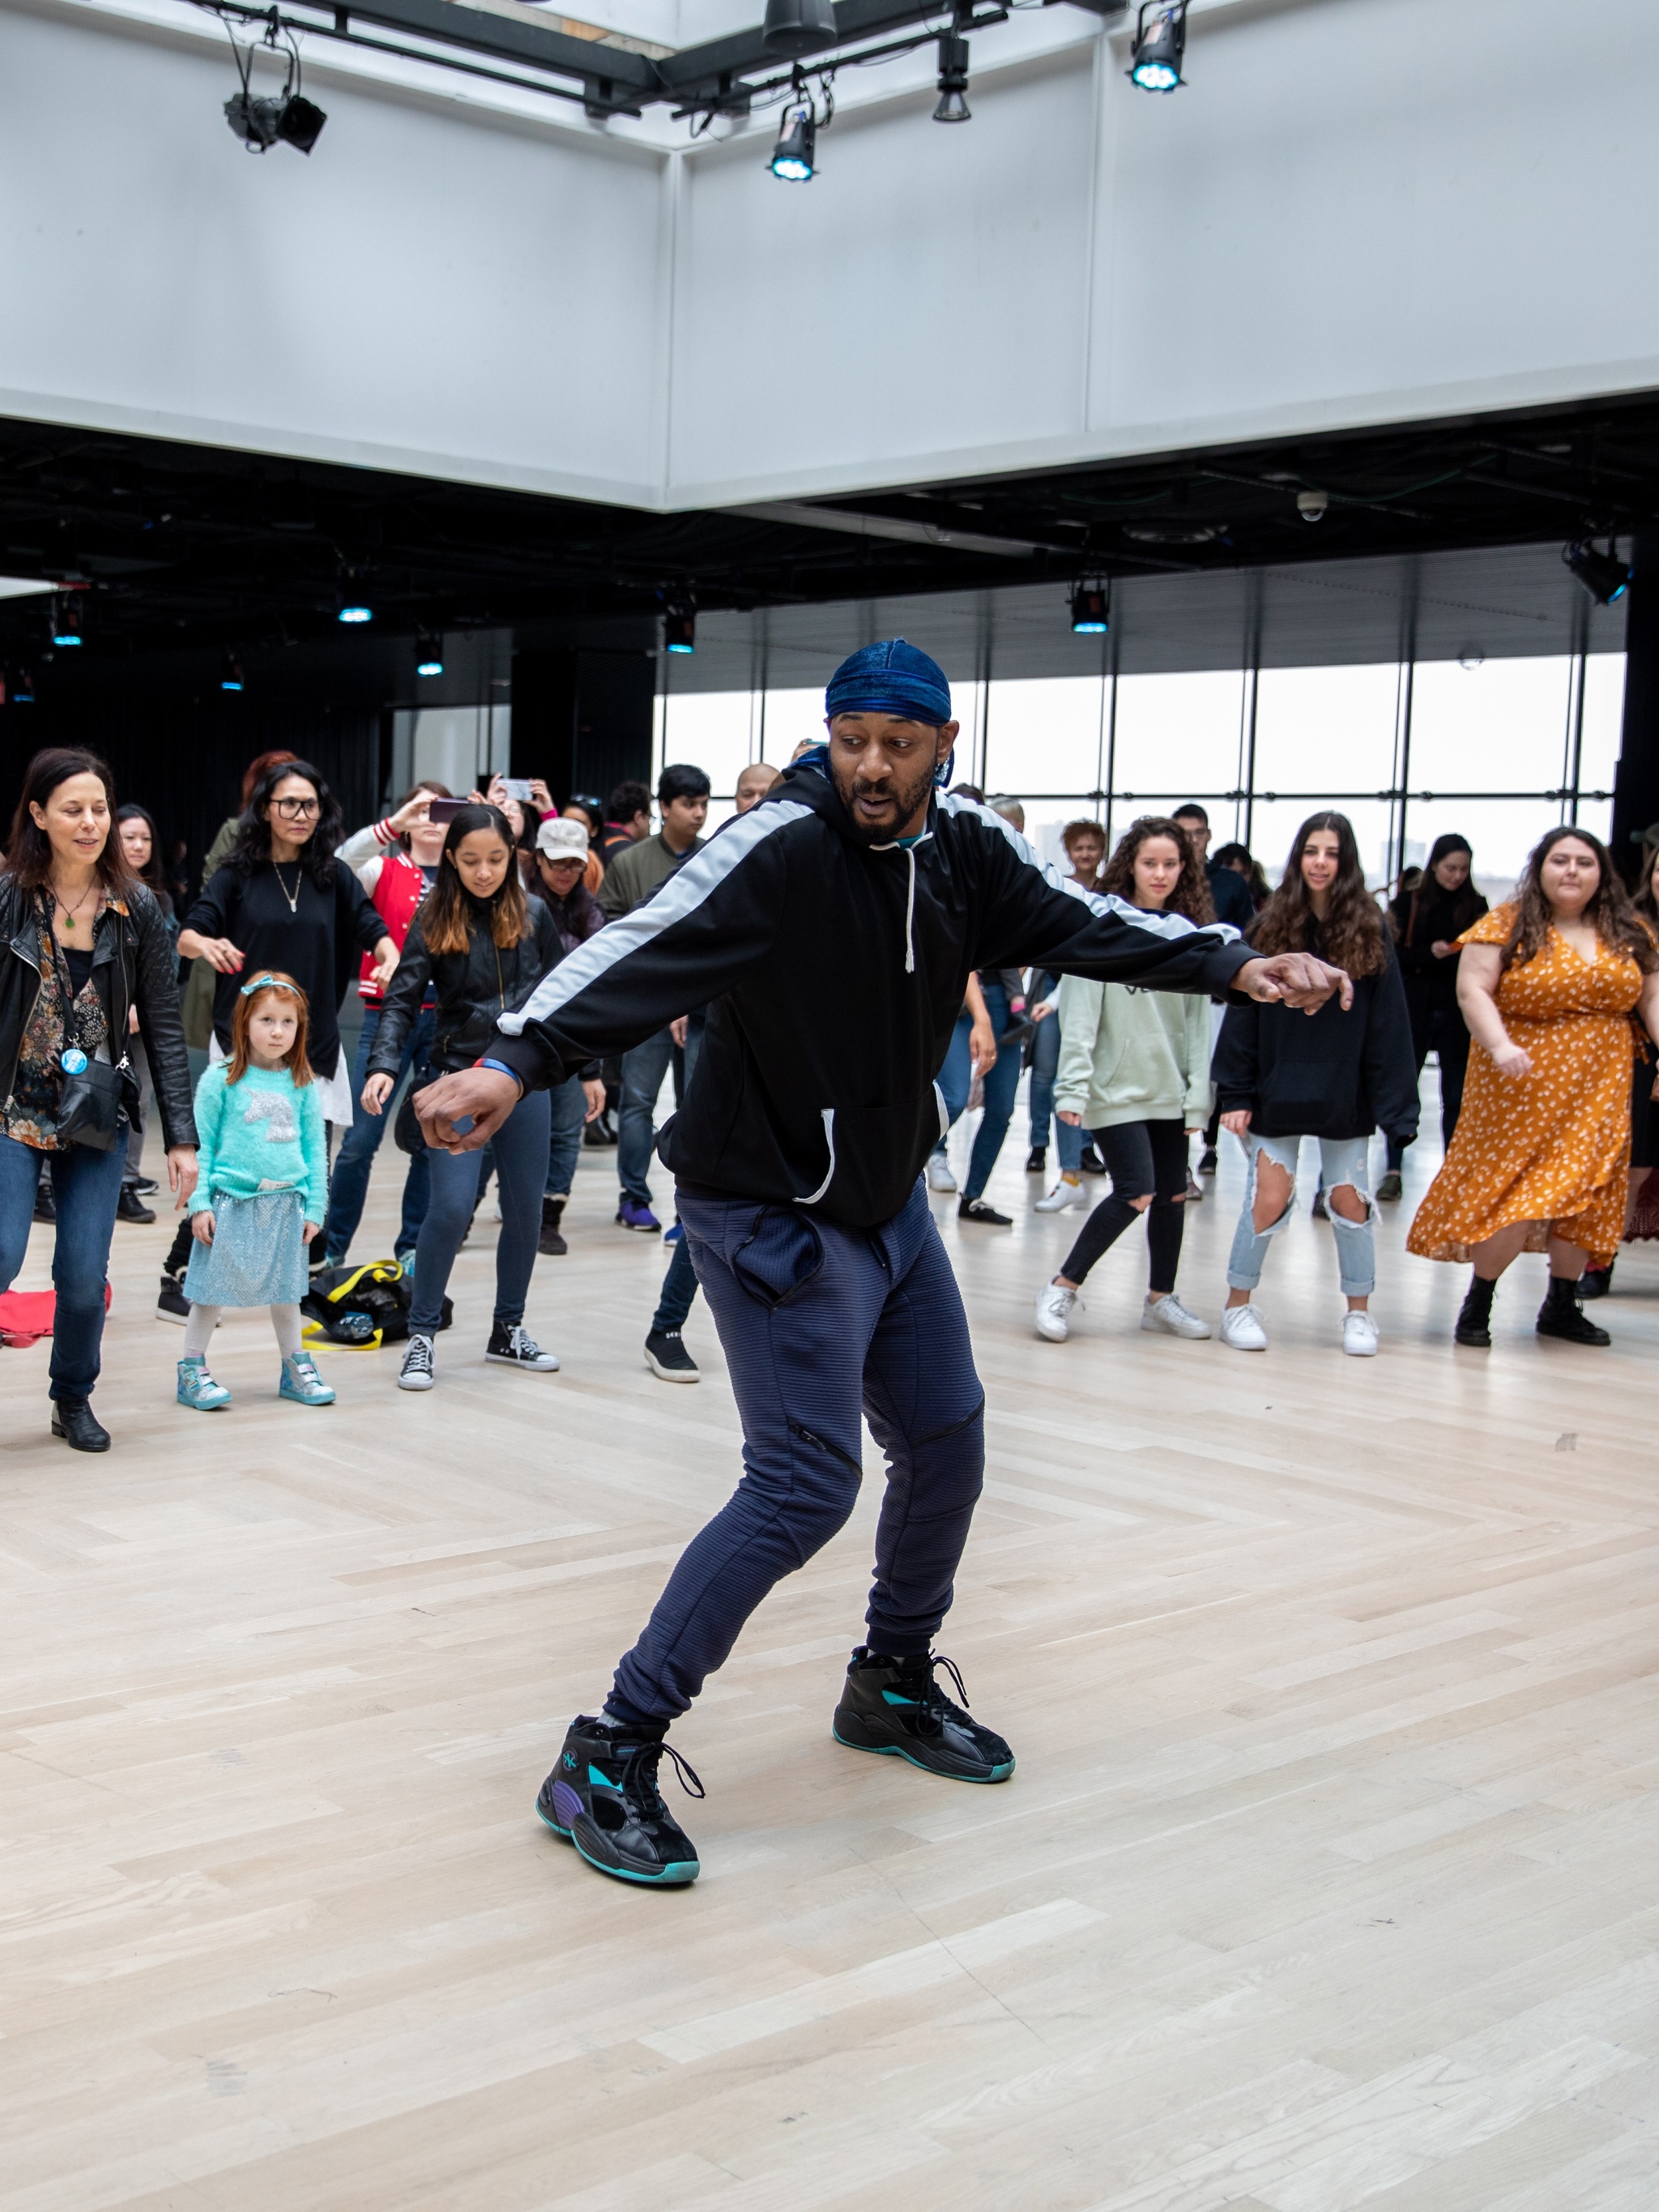 A man leading a dance workshop with participants behind him in a line in a well lit event space